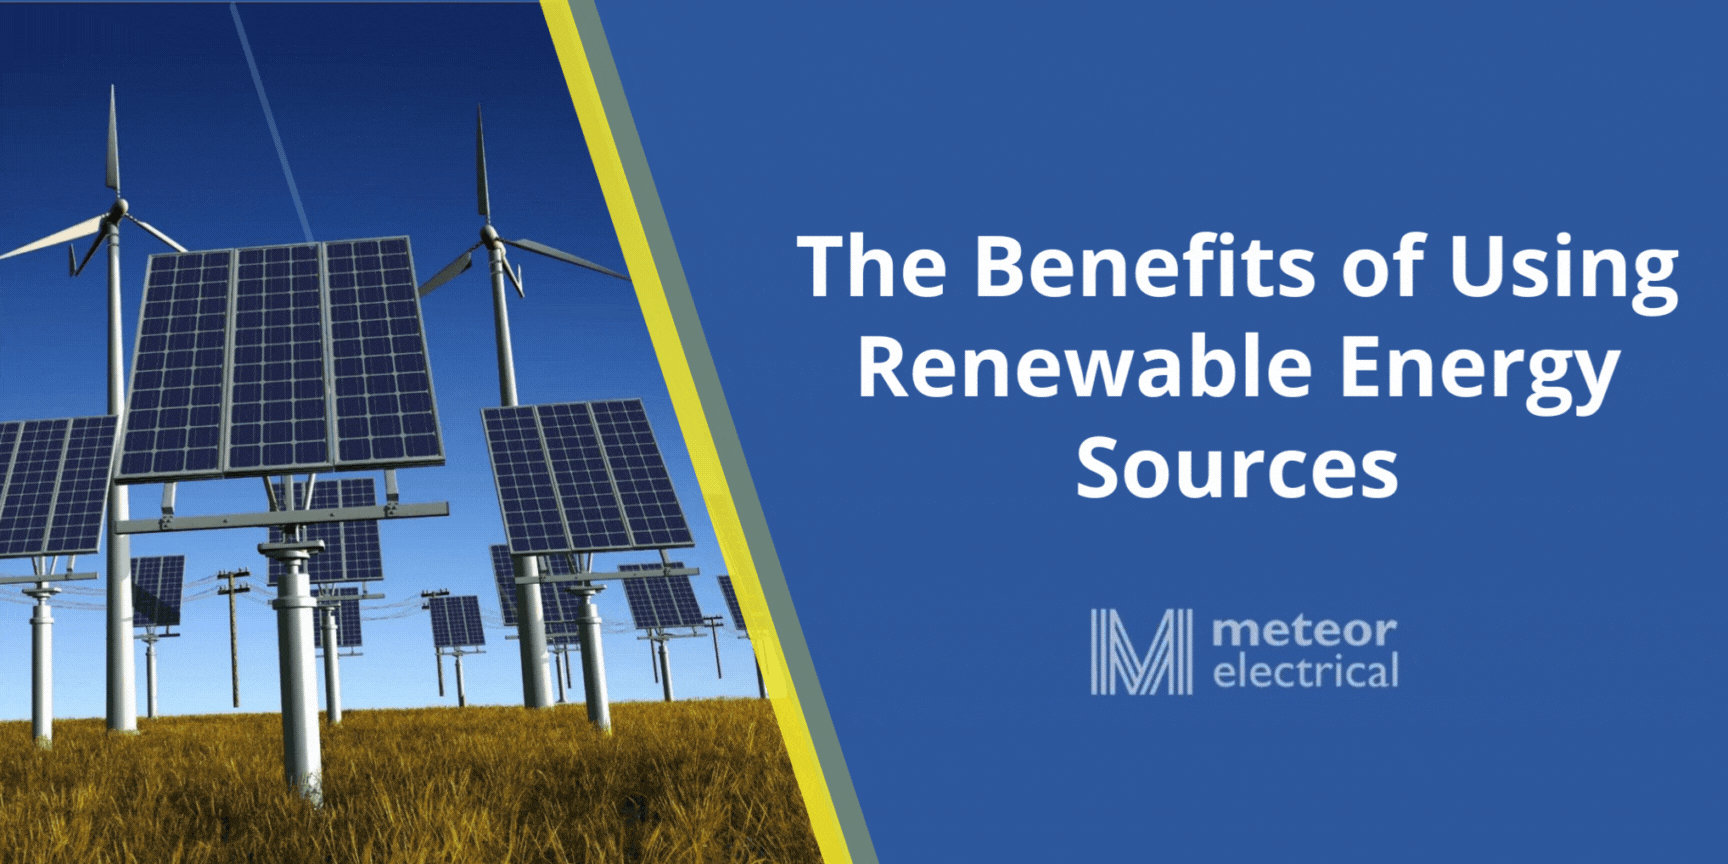 The Benefits of Using Renewable Energy Sources